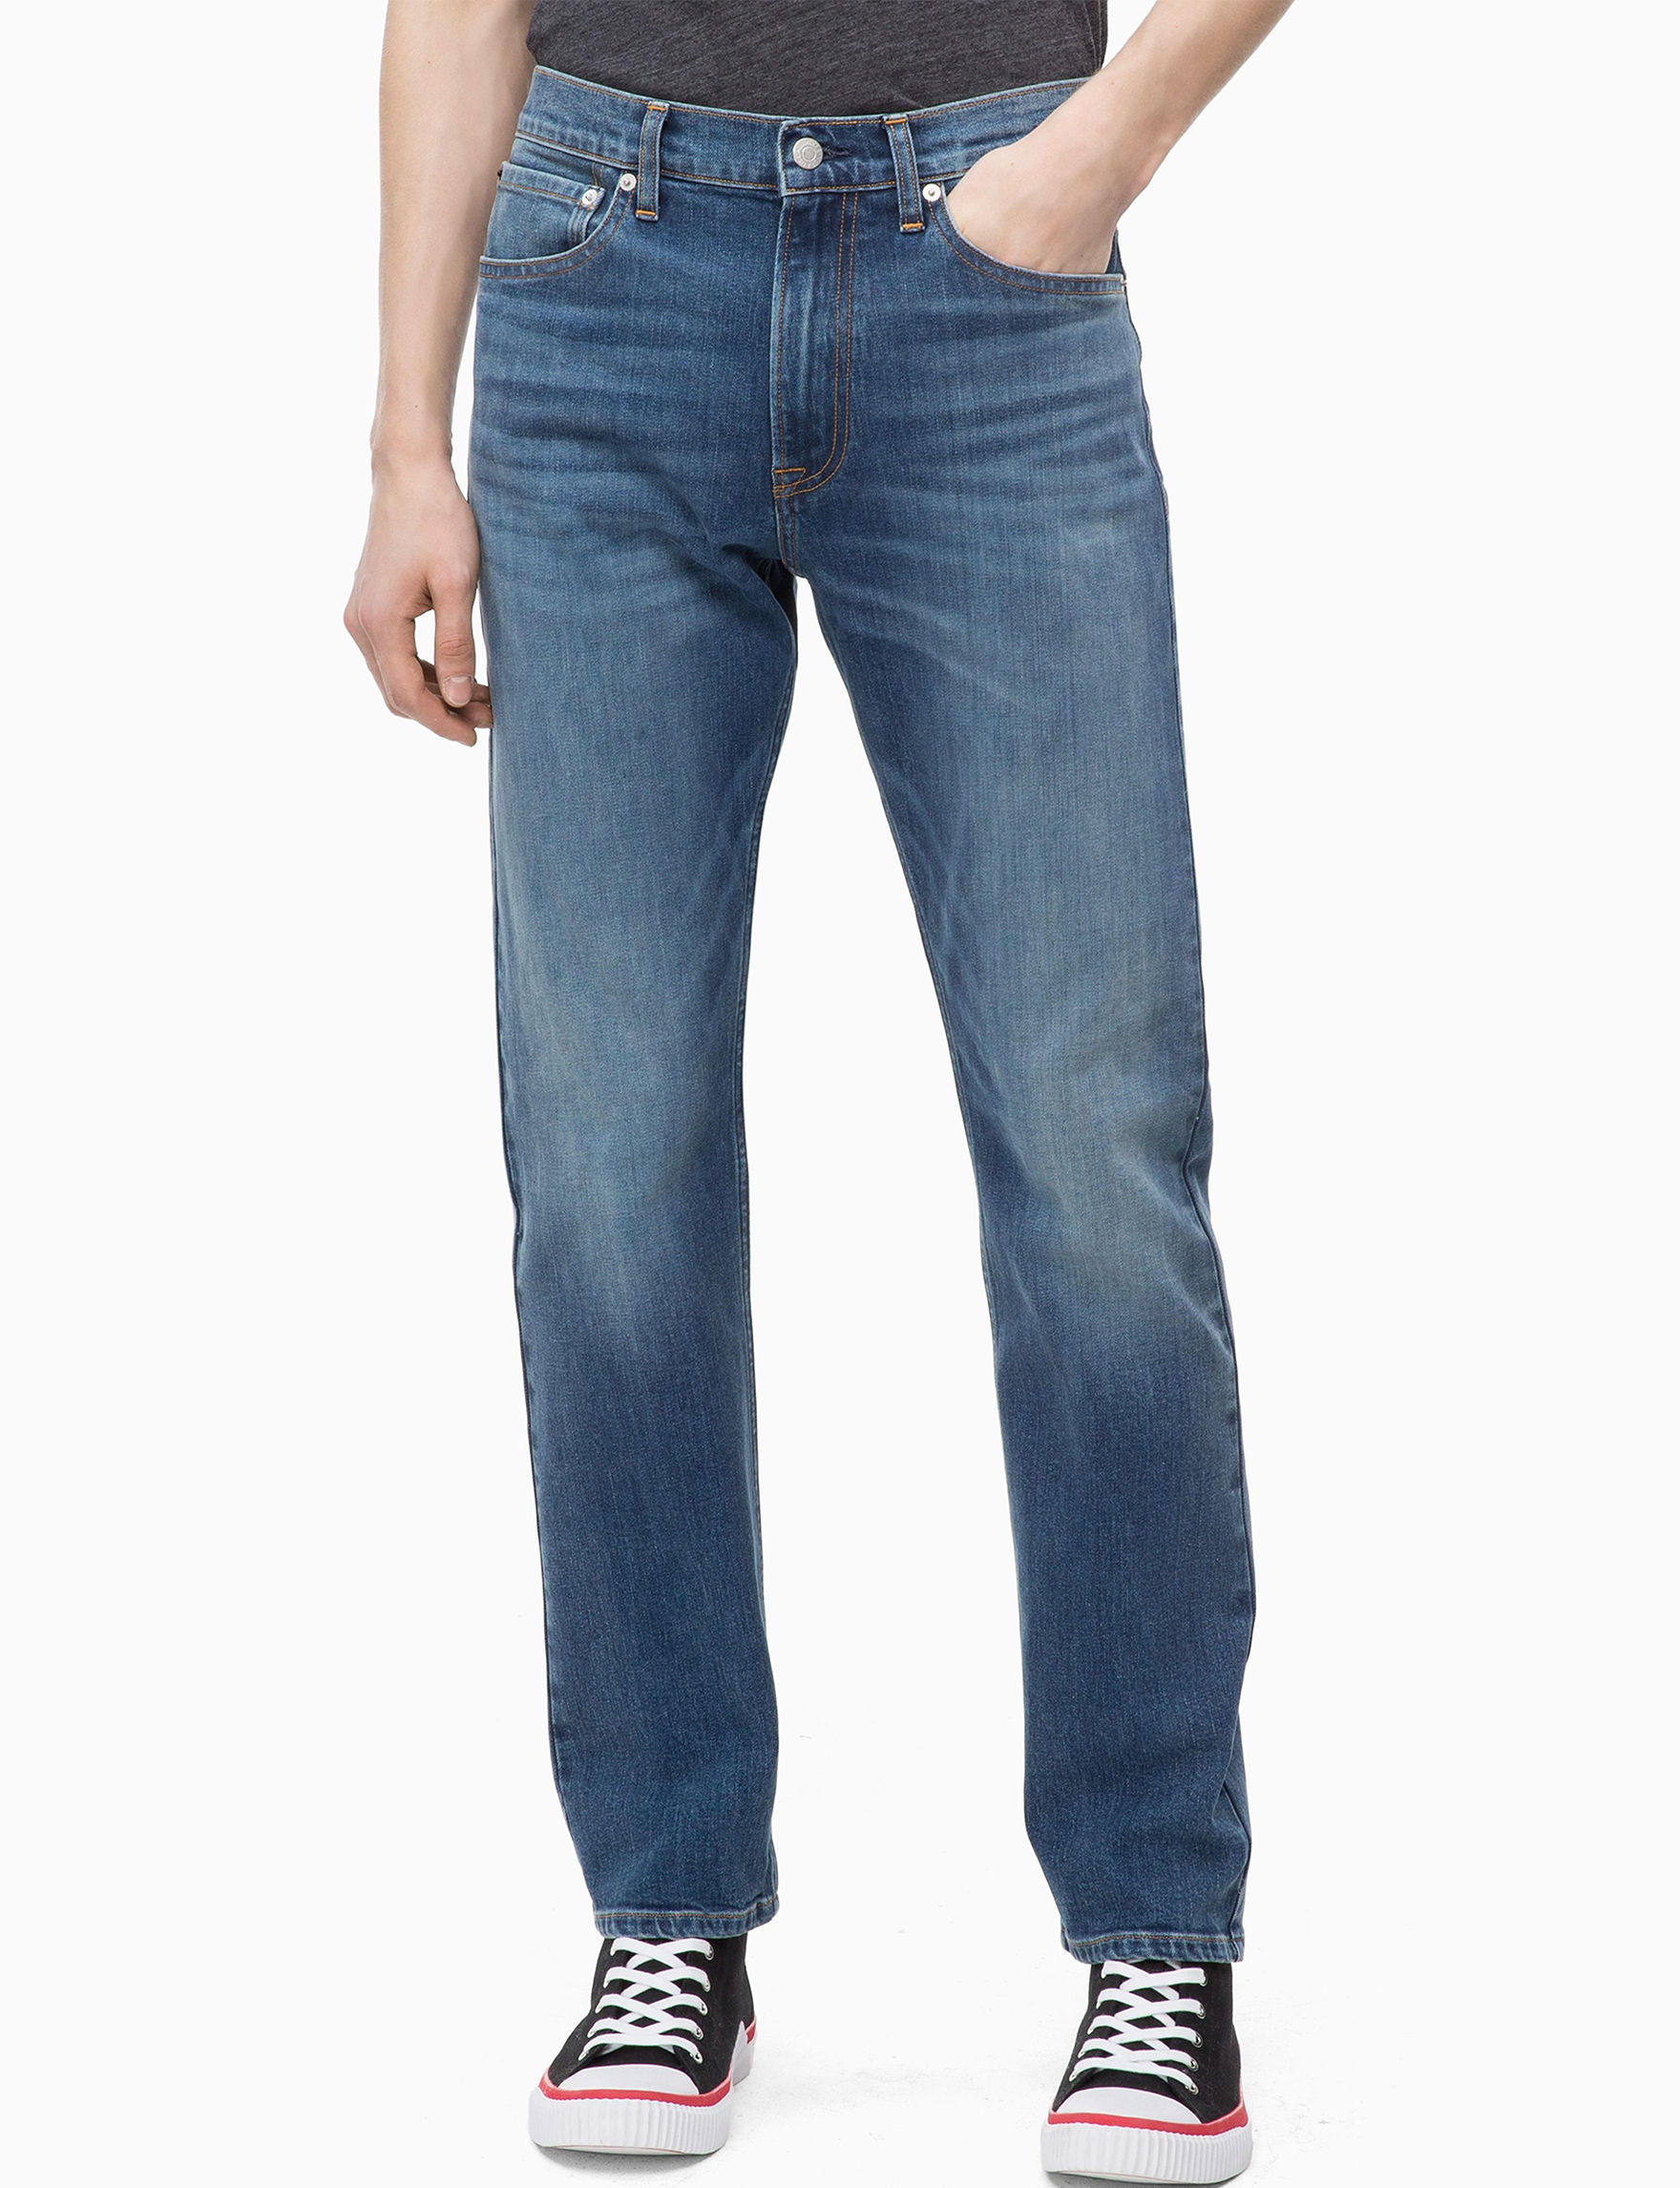 Calvin Klein Men's Straight Fit Jeans | Stage Stores